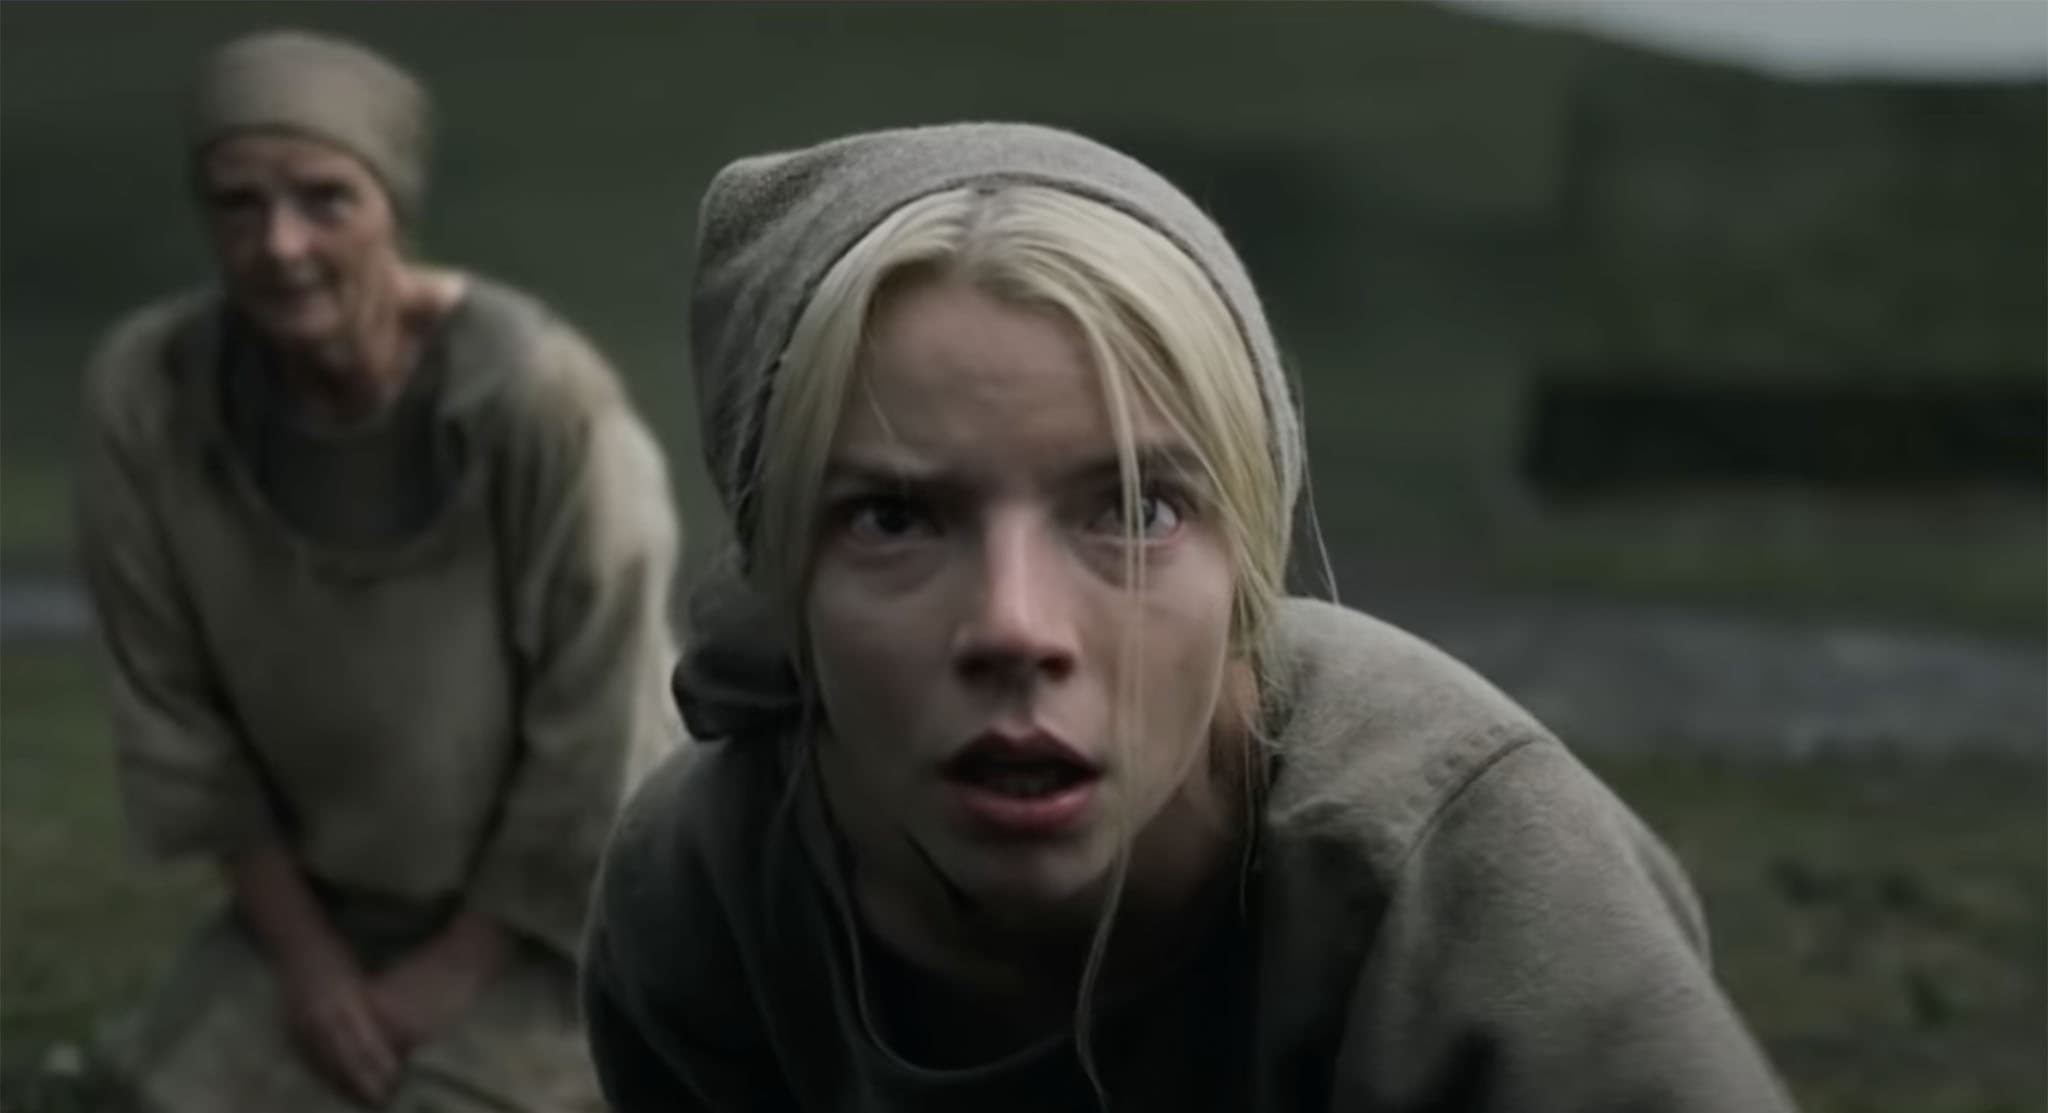 Anya Taylor-Joy plays sorceress Olga of the Birch Forest in the historical epic movie The Northman